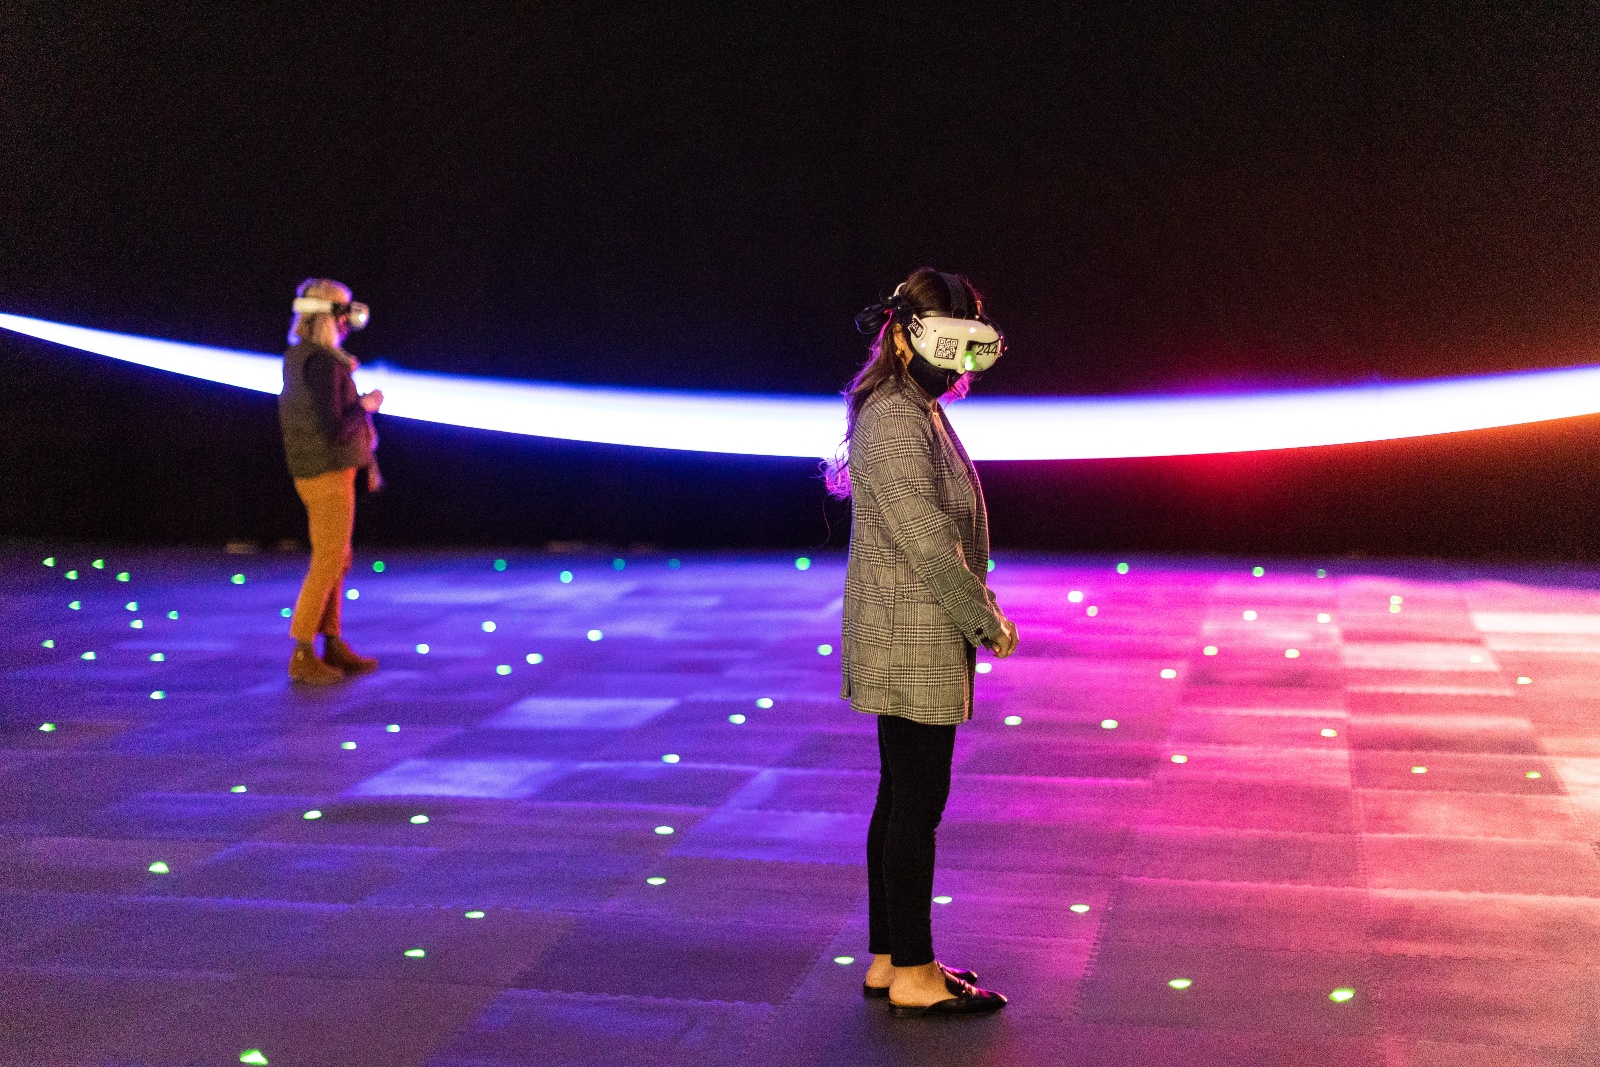 People wearing headsets stand on a purple gradient floor against a dark background with a white crescent moon over it.